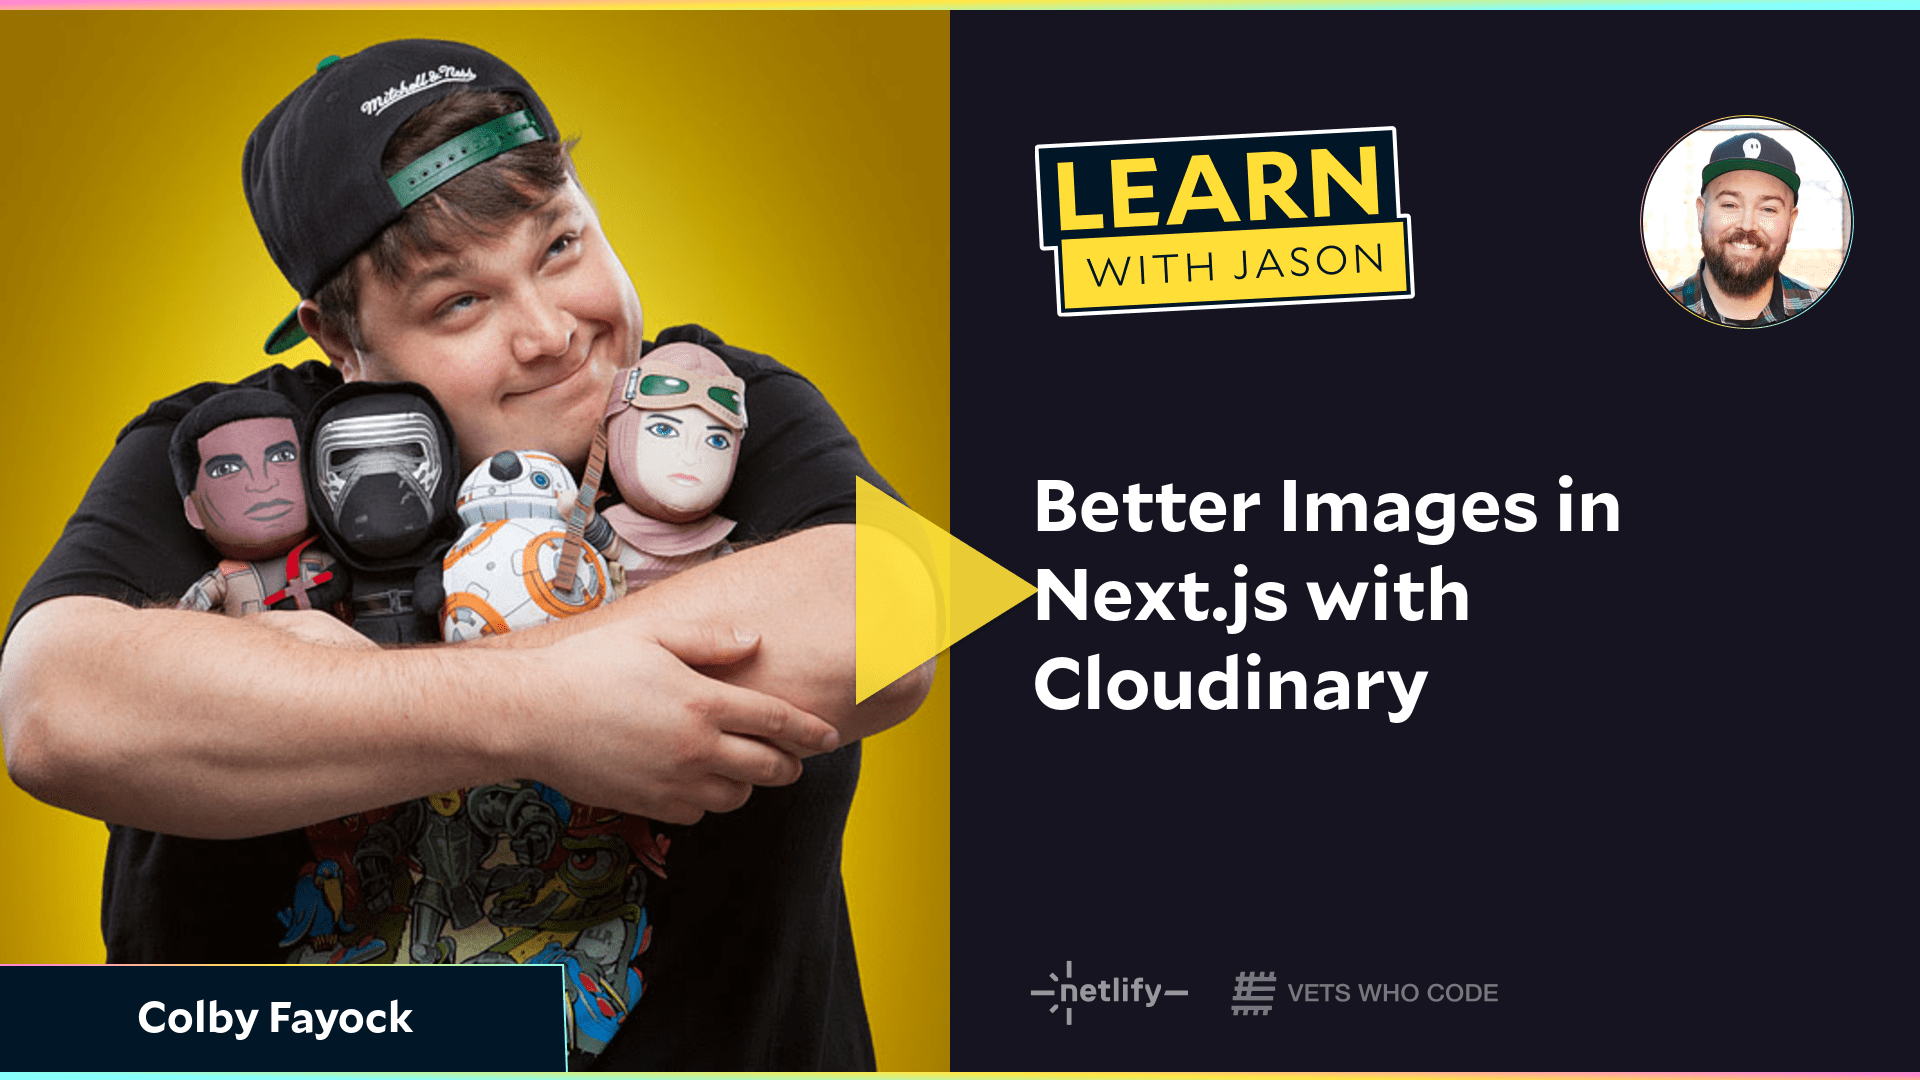 Better Images in Next.js with Cloudinary (with Colby Fayock)